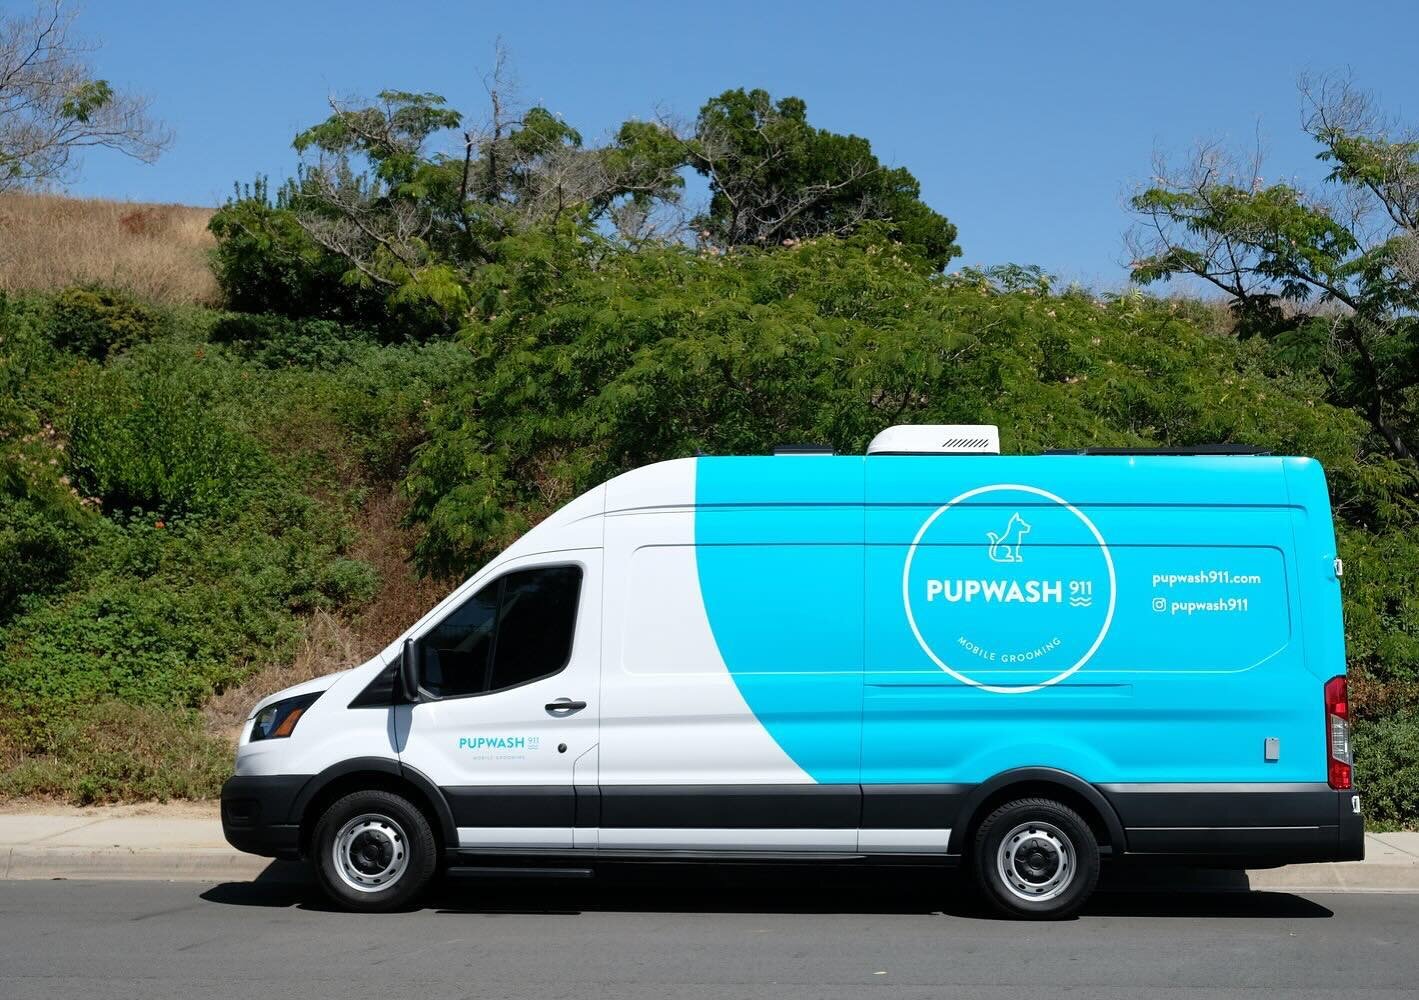 Pupwash 911 is a luxury mobile dog grooming company that brings a stress-free, one-on-one grooming experience to your doorstop. Have you booked your pup&rsquo;s spring makeover yet? 🚐💨

#pupwash911 #gettailstowag #springishere #ford #dogs #puppies 